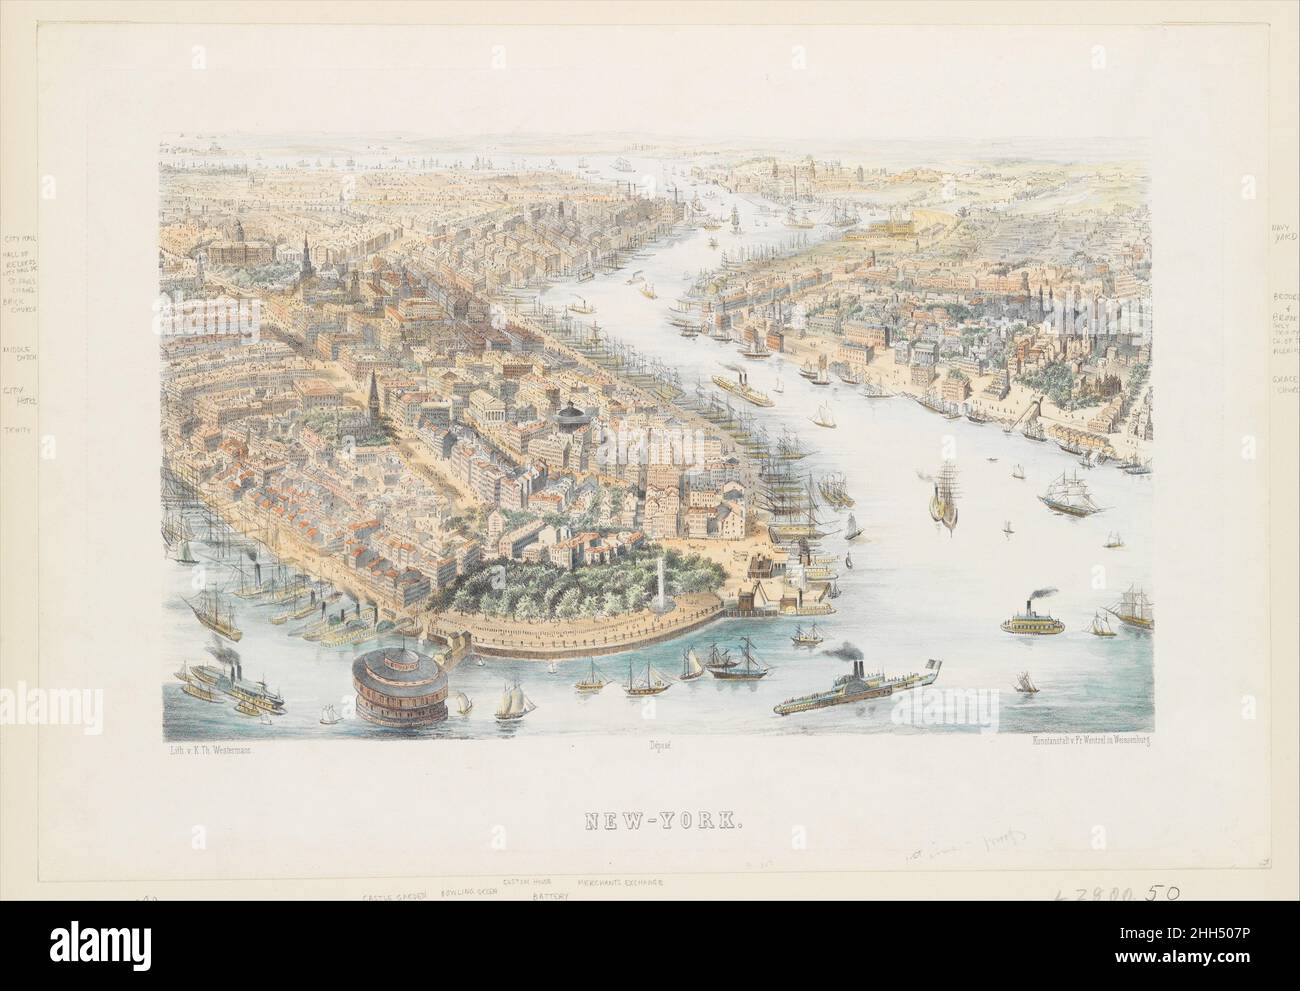 New-York (From the Southwest) ca. 1852 Lithographed by K. Th. Westermann German. New-York (From the Southwest)  380838 Lithographer: Lithographed by K. Th. Westermann, German, active 1852, Publisher: Franz Wentzel, German , Weissenburg, New-York (From the Southwest), ca. 1852, Hand-colored lithograph, image: 8 7/8 x 14 9/16 in. (22.6 x 37.1 cm) sheet: 12 9/16 x 18 1/8 in. (32 x 46.1 cm). The Metropolitan Museum of Art, New York. The Edward W. C. Arnold Collection of New York Prints, Maps and Pictures, Bequest of Edward W. C. Arnold, 1954 (54.90.769) Stock Photo